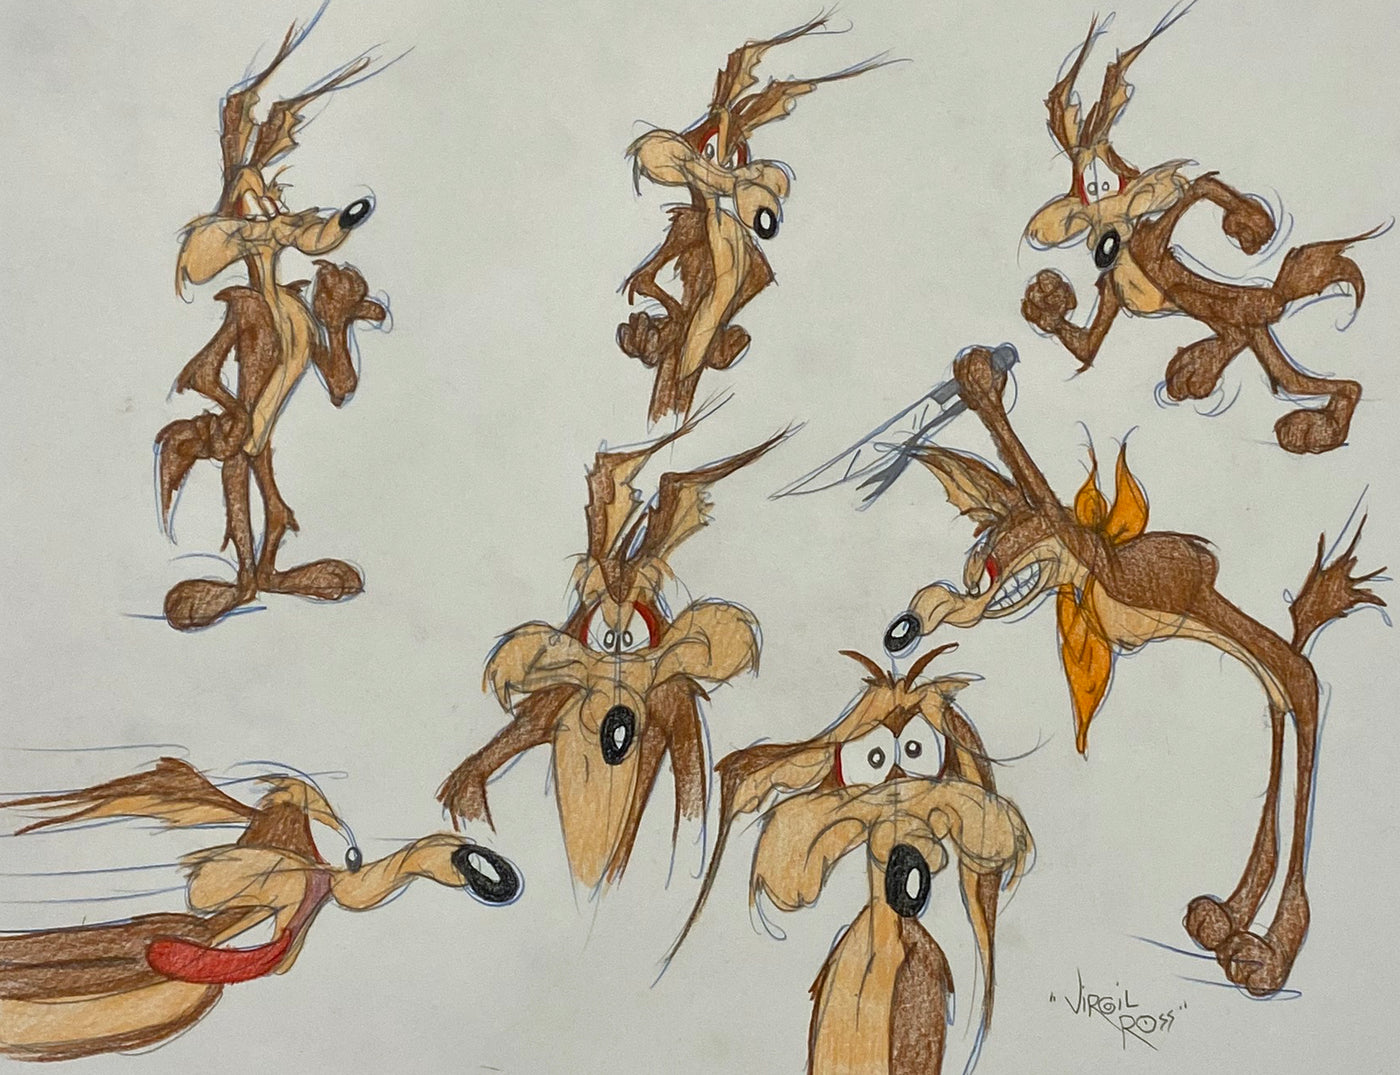 Original Warner Brothers Virgil Ross Model Sheet Animation Drawing featuring Wile E. Coyote